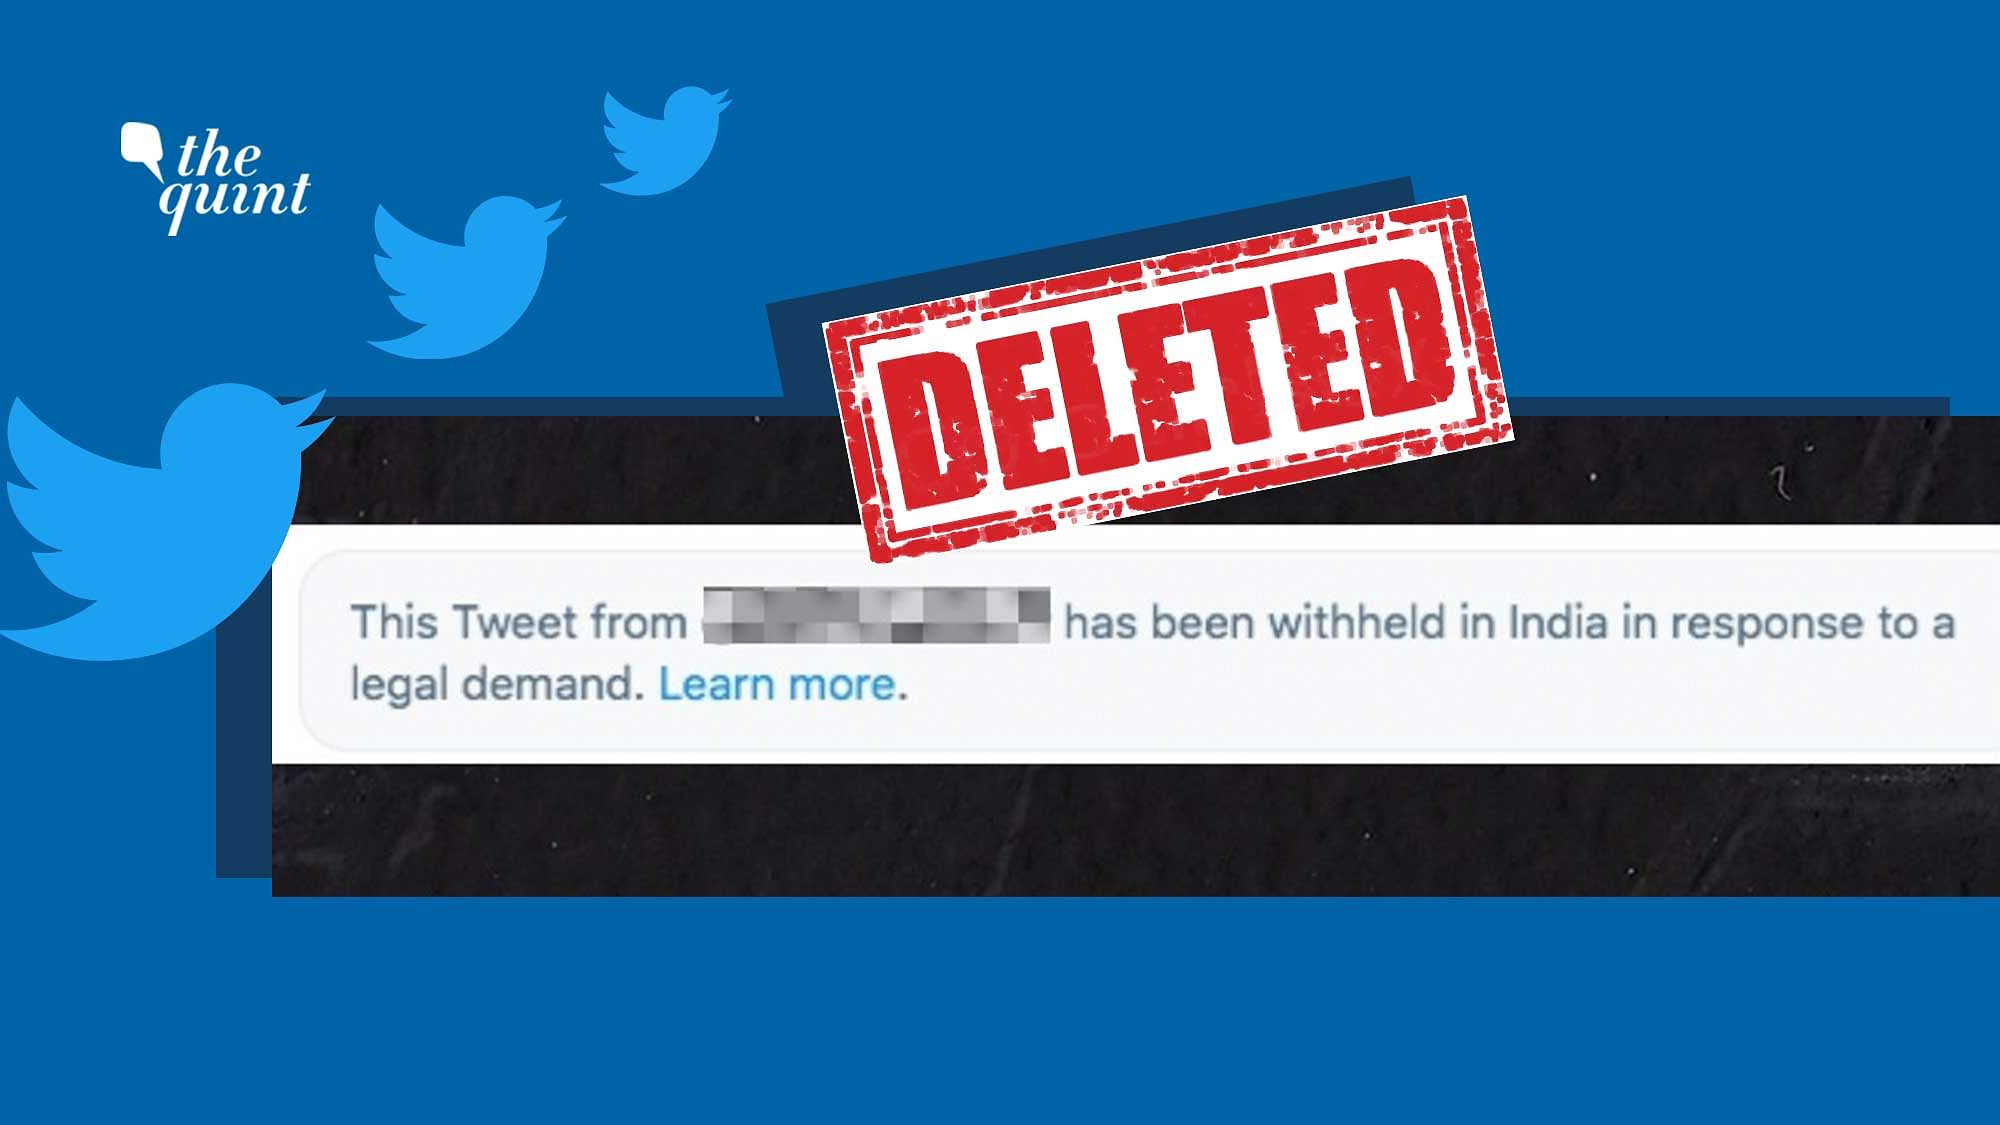 Complying with the government’s requests, Twitter has censored 52 tweets that were critical of the government’s actions around the second surge of COVID-19